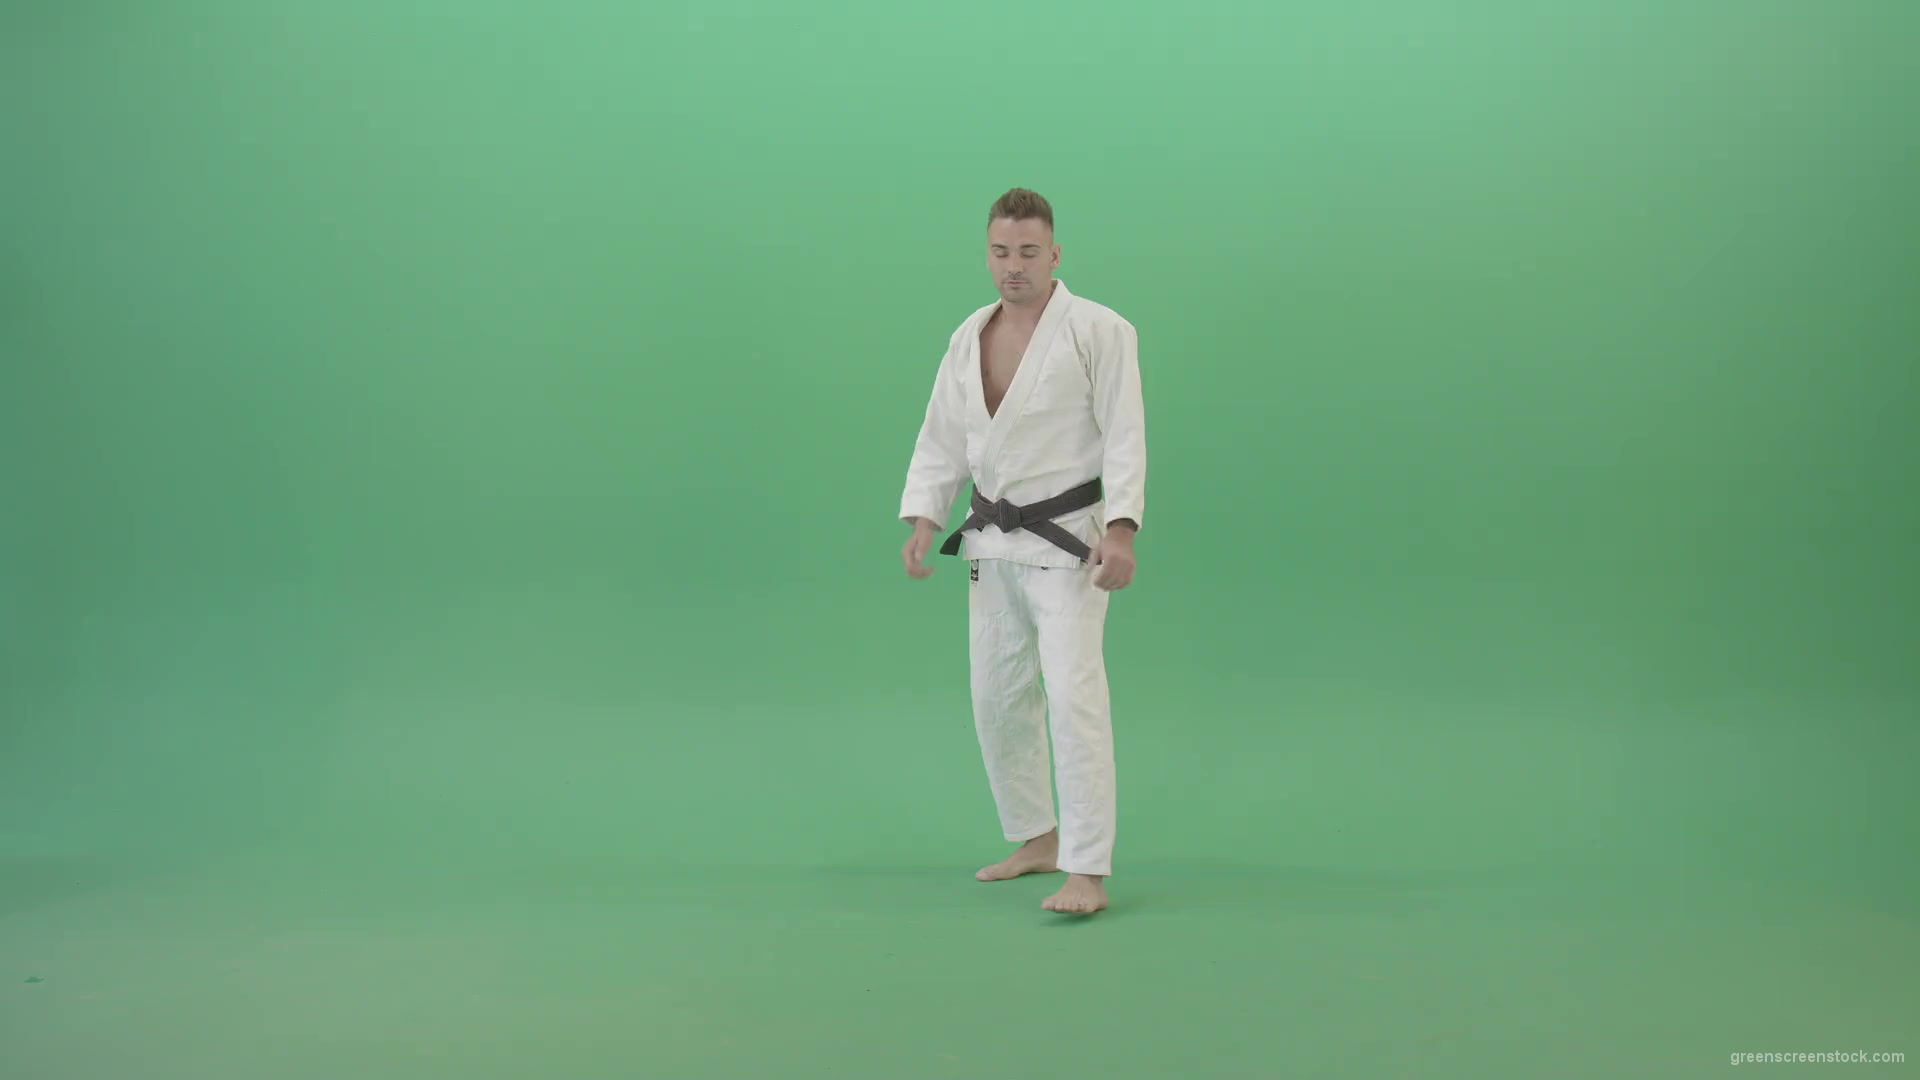 Karate-man-fight-front-vie-kick-punch-isolated-on-green-screen-4K-Video-Footage-1920_001 Green Screen Stock